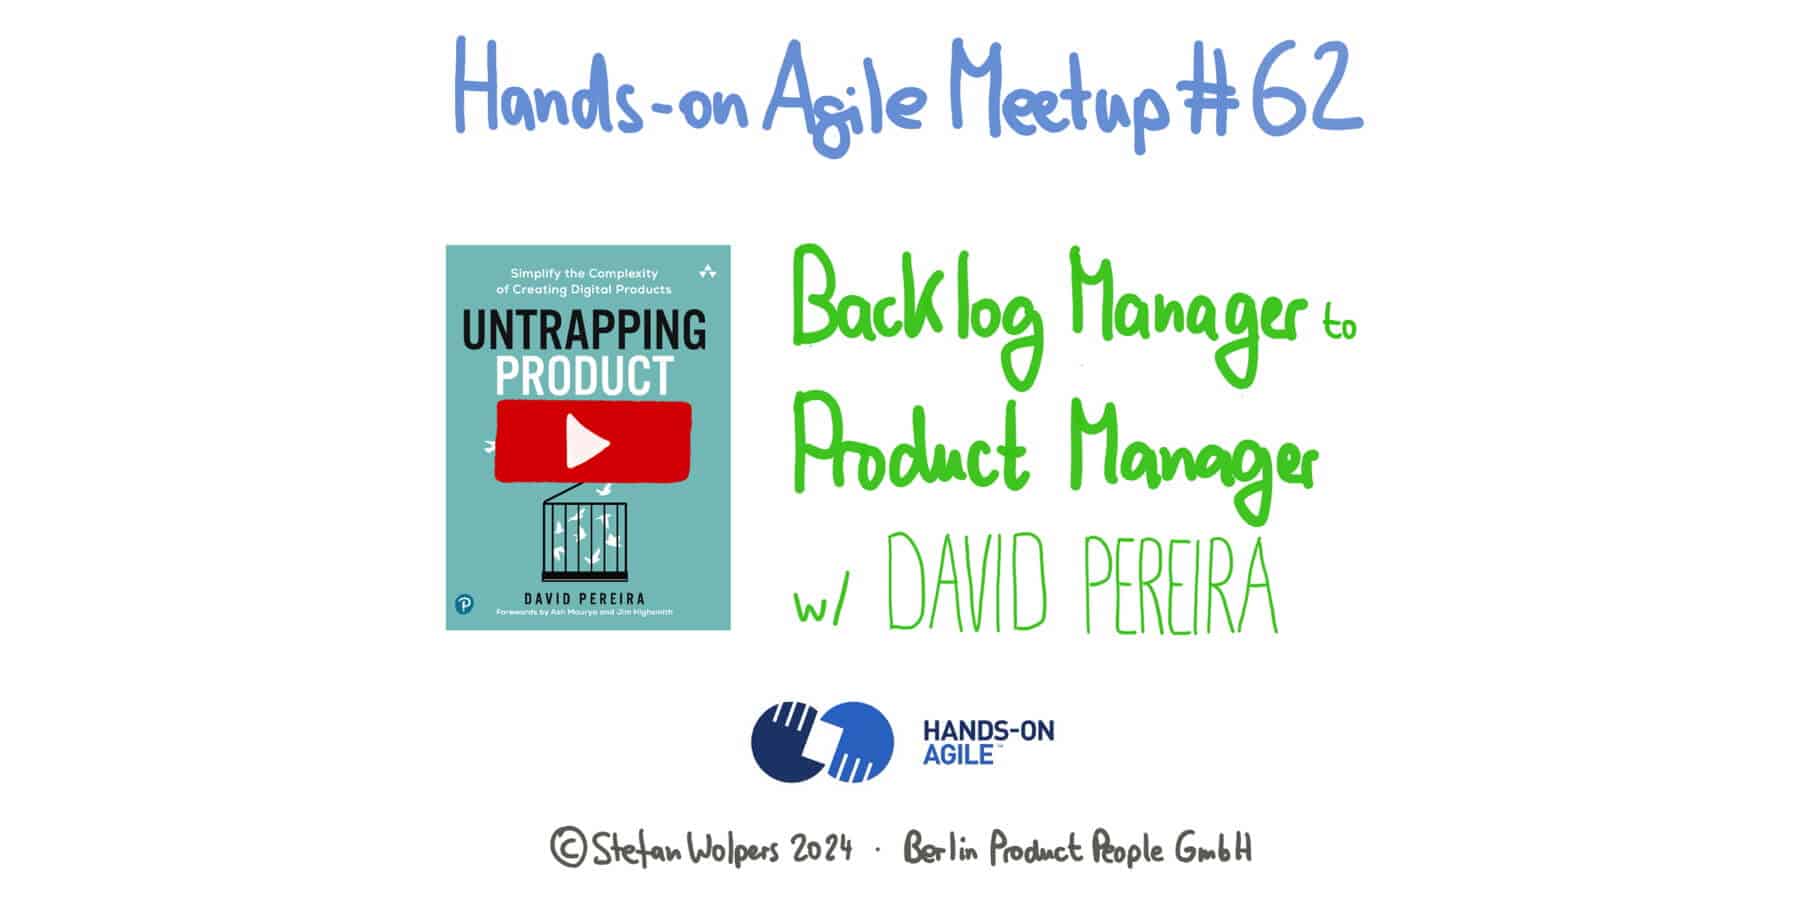 From Backlog Manager to Product Manager with David Pereira on June 6, 2024 — Hands-on Agile #62 by Berlin-Product-People.com.